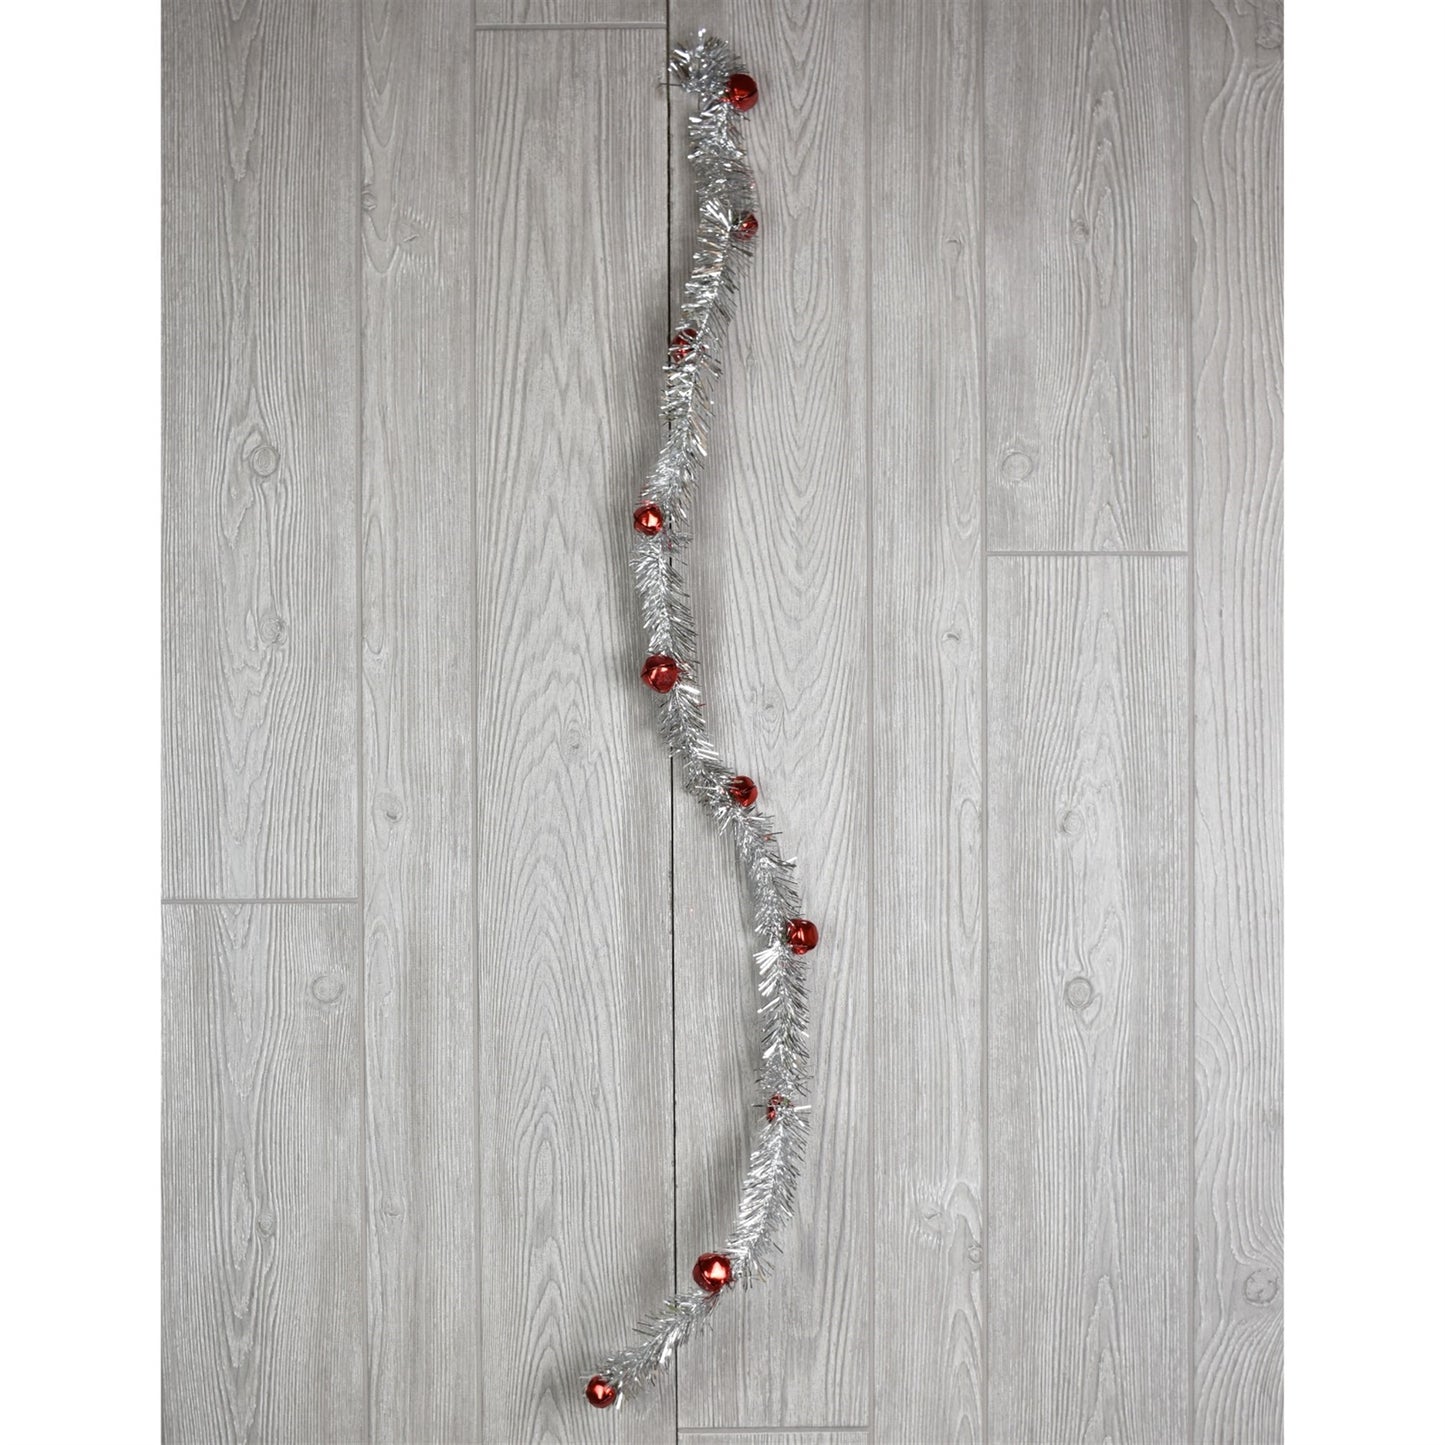 4' Tinsel Jingle Bells Garland in Apple/Red, Red/Silver, or Silver/Red | QG